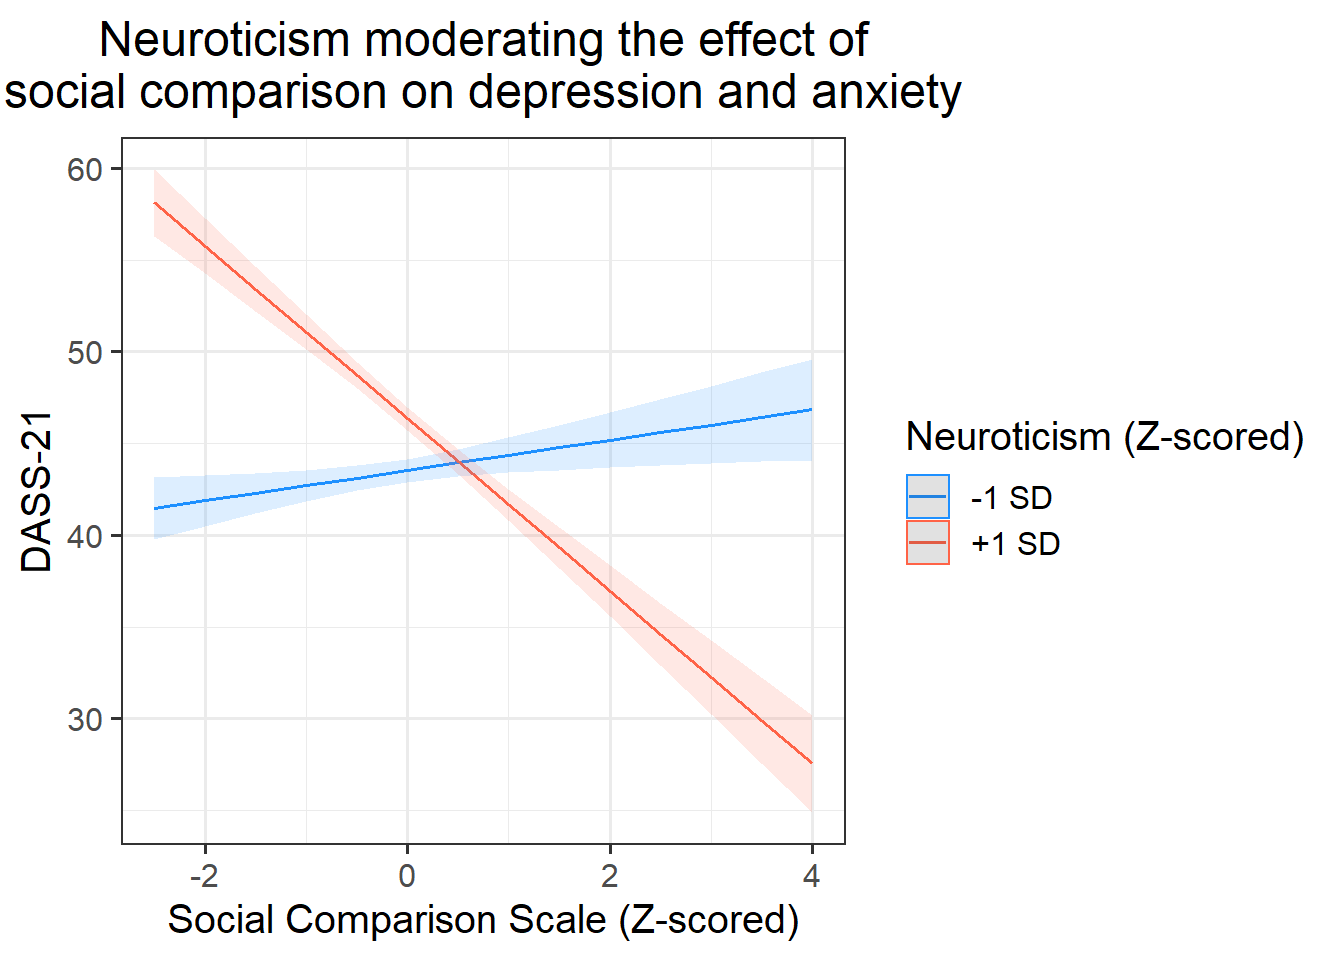 Predicted DASS-21 score across SCS scores, for +/-1 SD Neuroticism